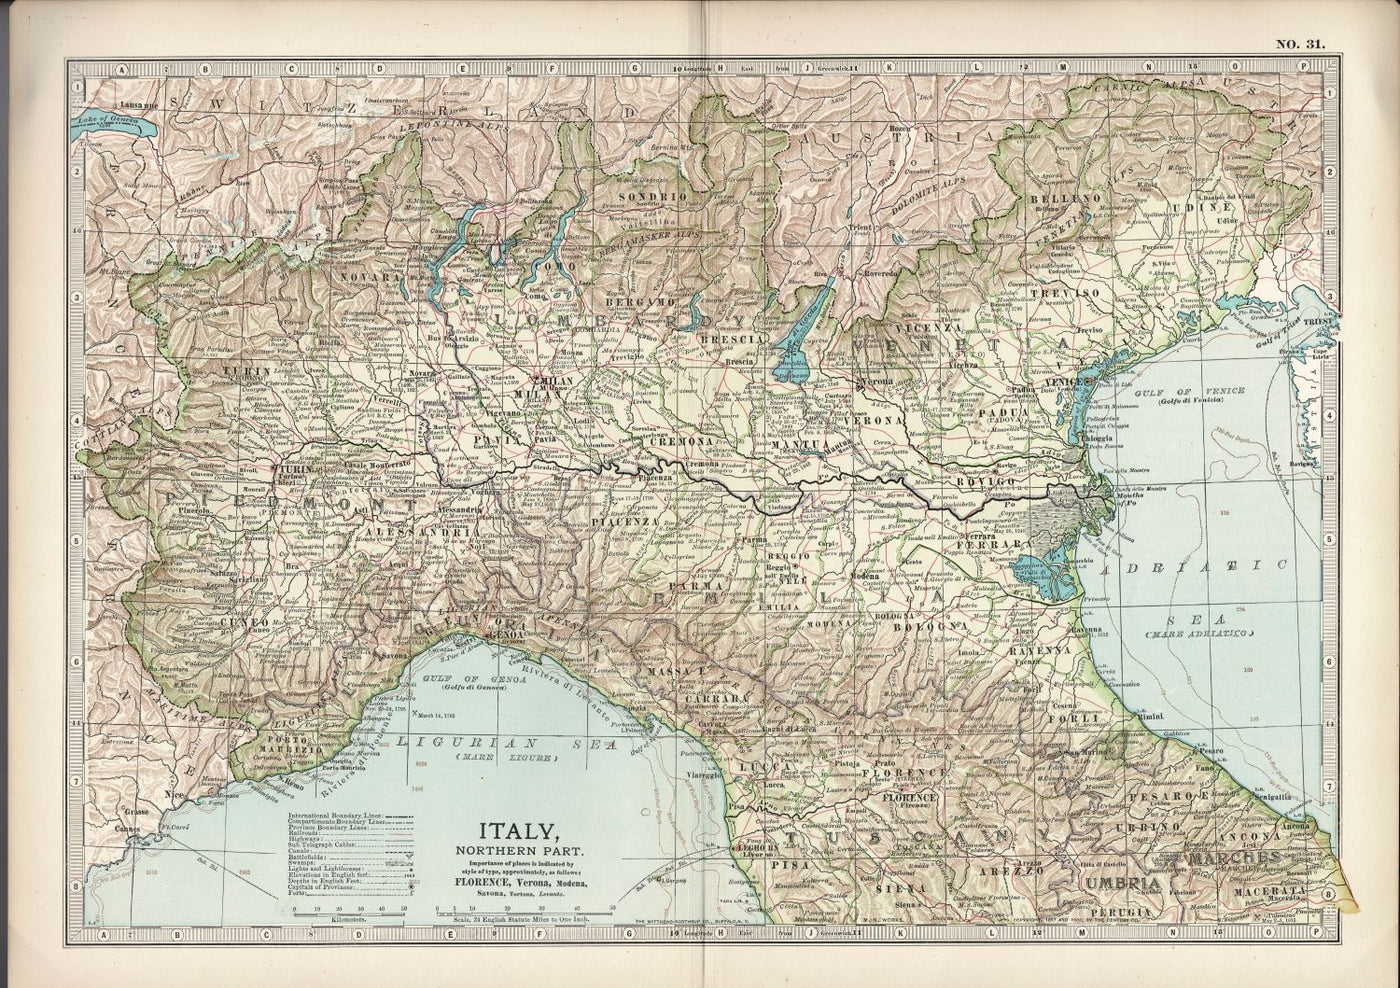 Italy Northern Part antique map from Encyclopedia Britannica 1903